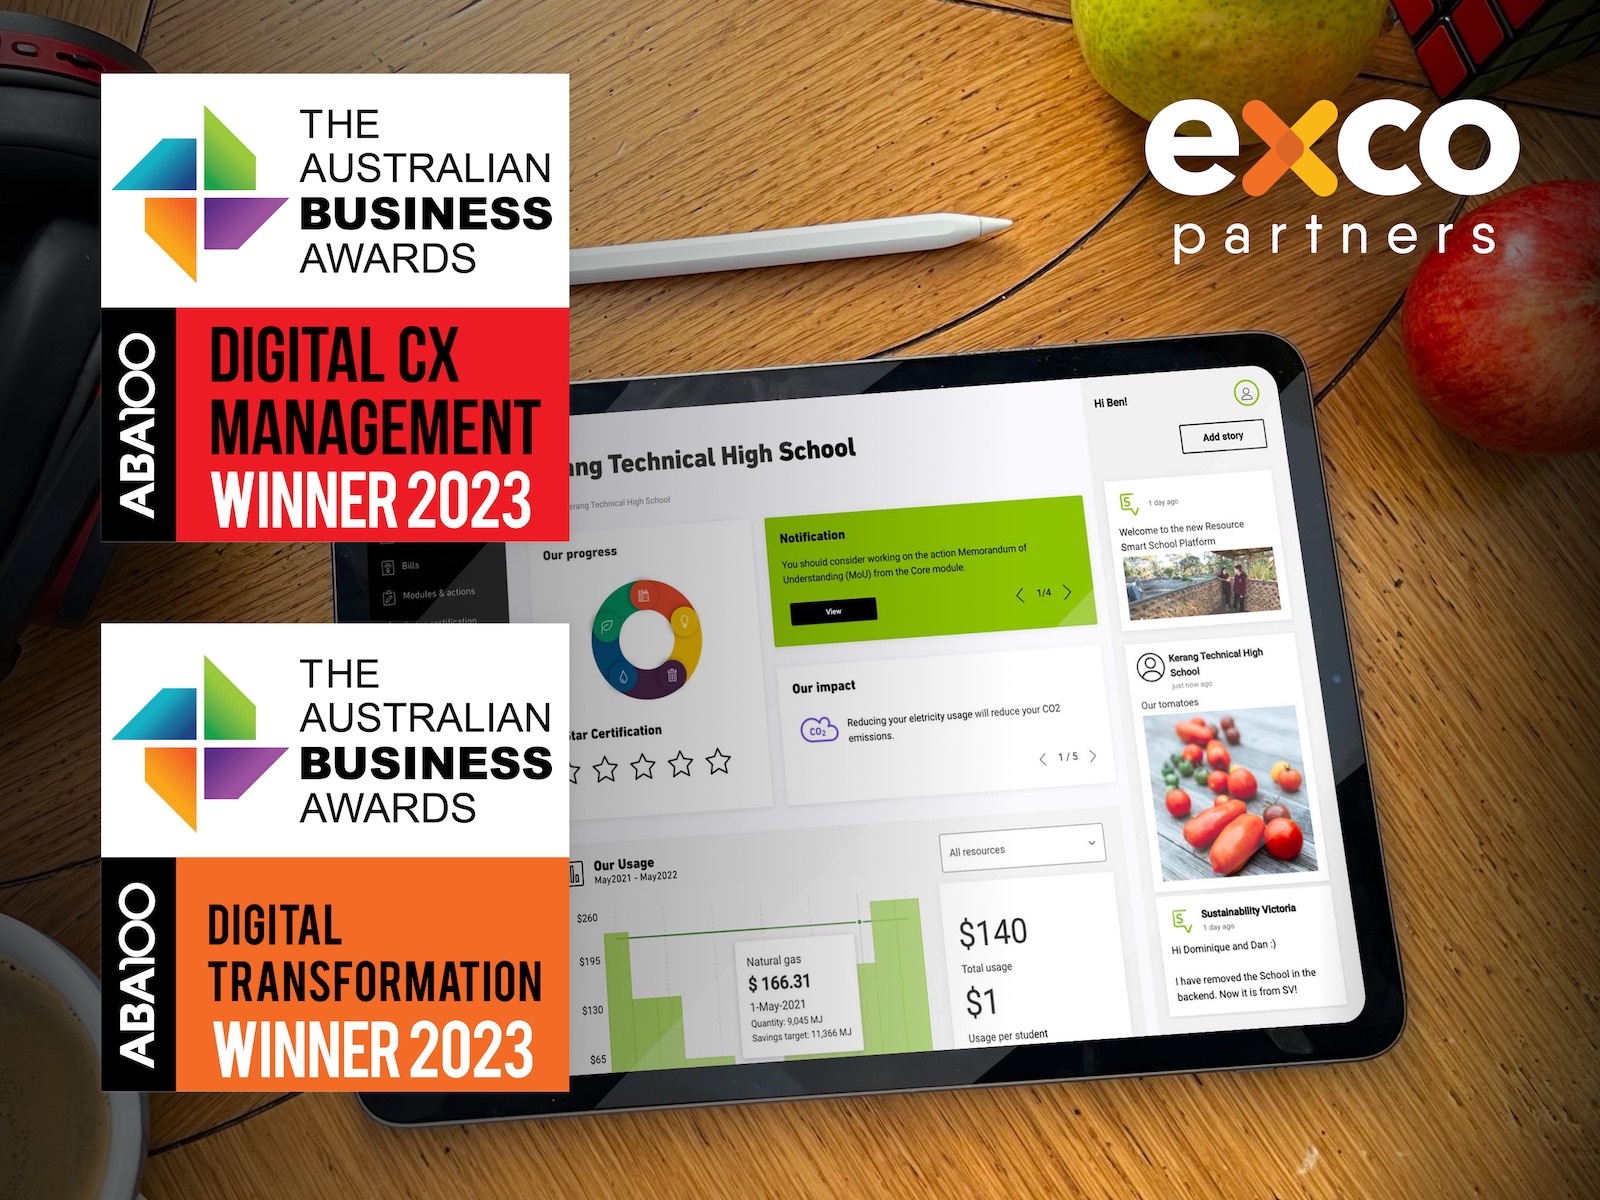 Feature image for Digital Customer Experience and Digital Transformation Winner 2023